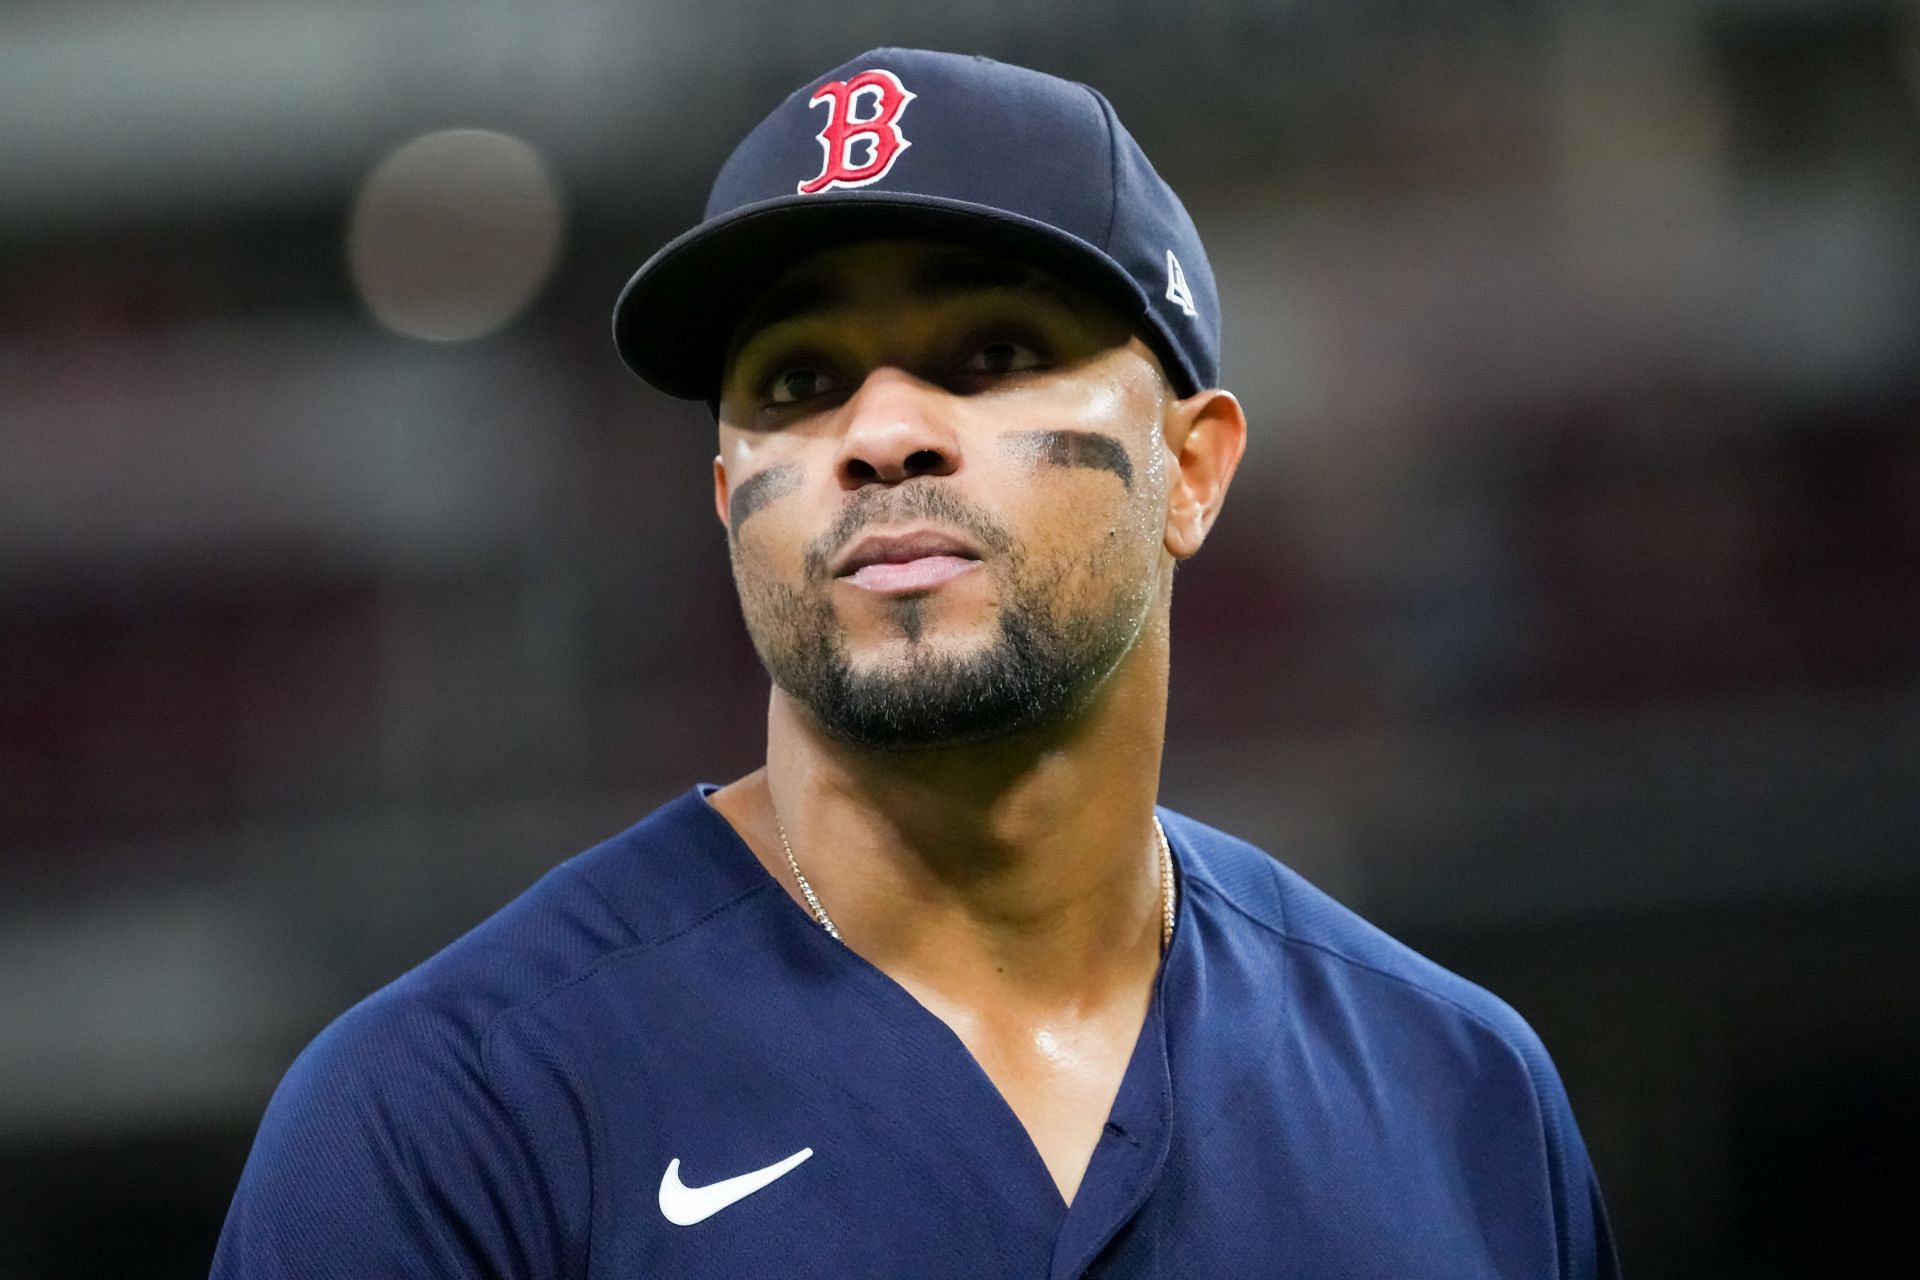 Xander Bogaerts Net Worth 2023, Salary, Endorsements, House, and more